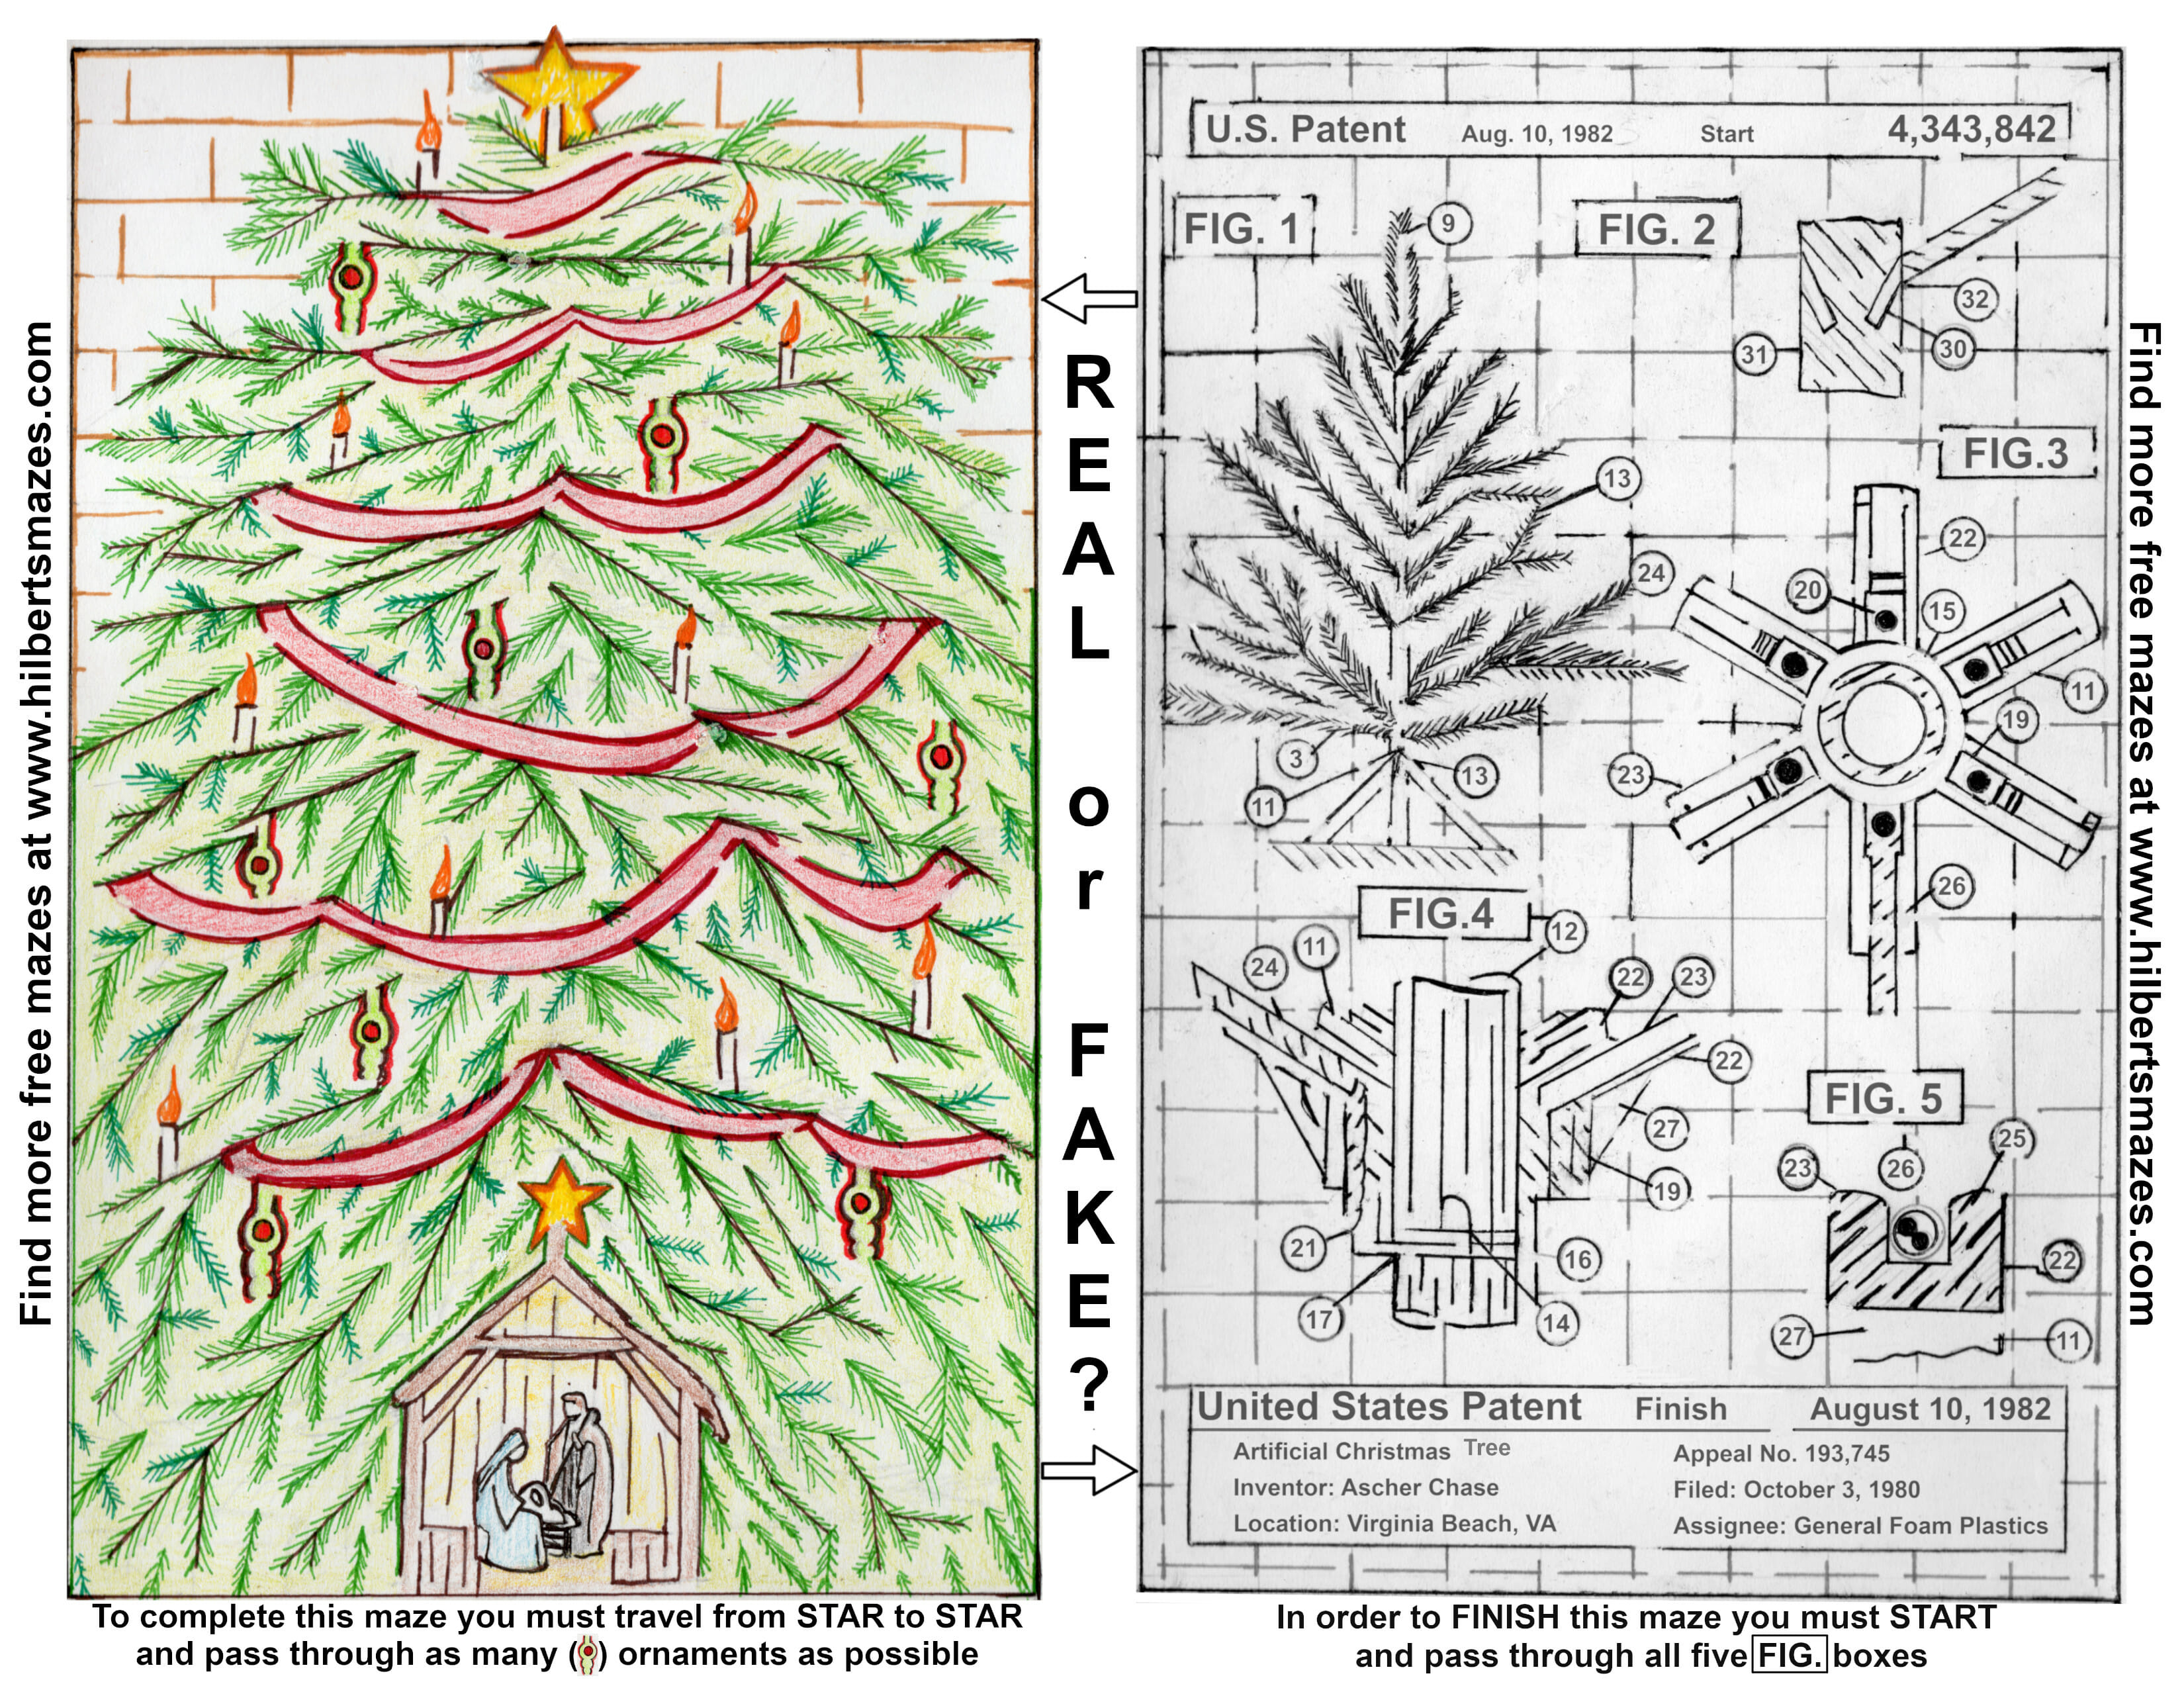 Free Printable Hand Drawn Christmas Tree Maze. Easily downloadable and printable PDF format. Great Mazes for both kids & adults very challenging but fun.